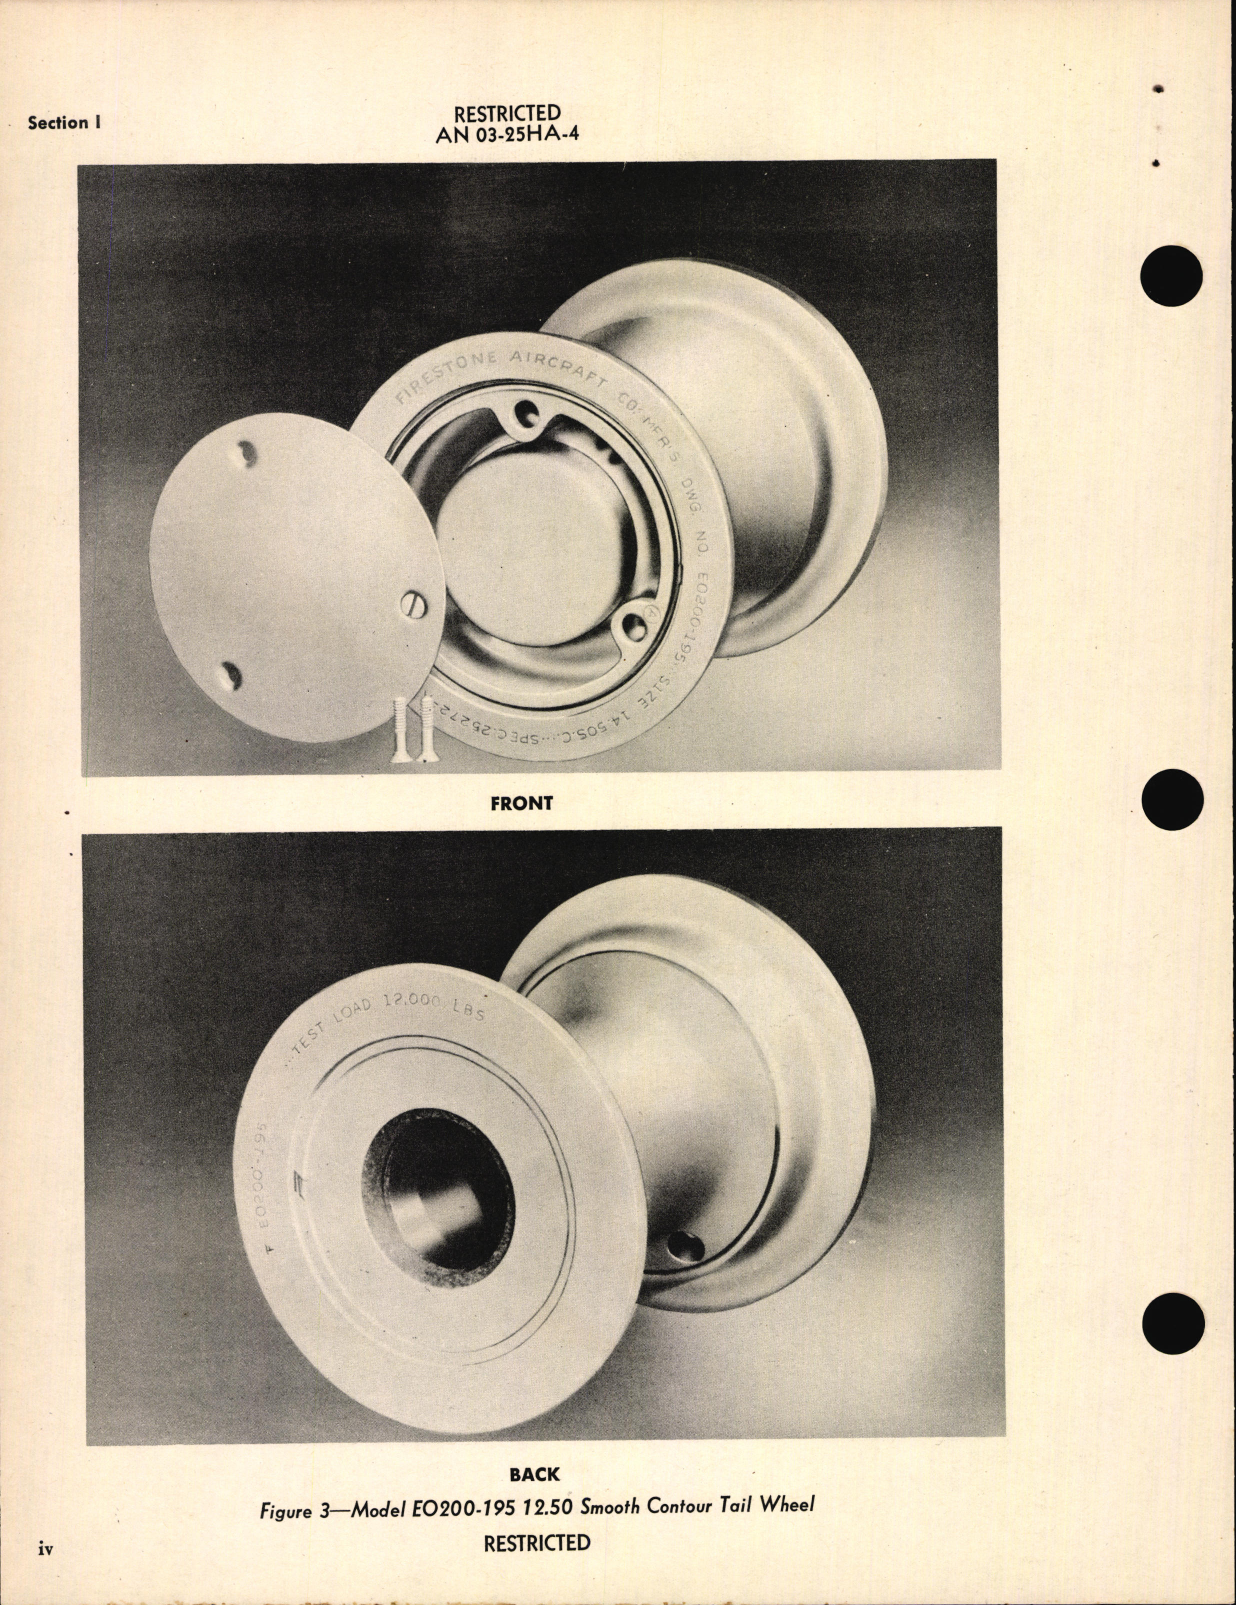 Sample page 6 from AirCorps Library document: Handbook of Instructions with Parts Catalog for Tail Wheels (Firestone)